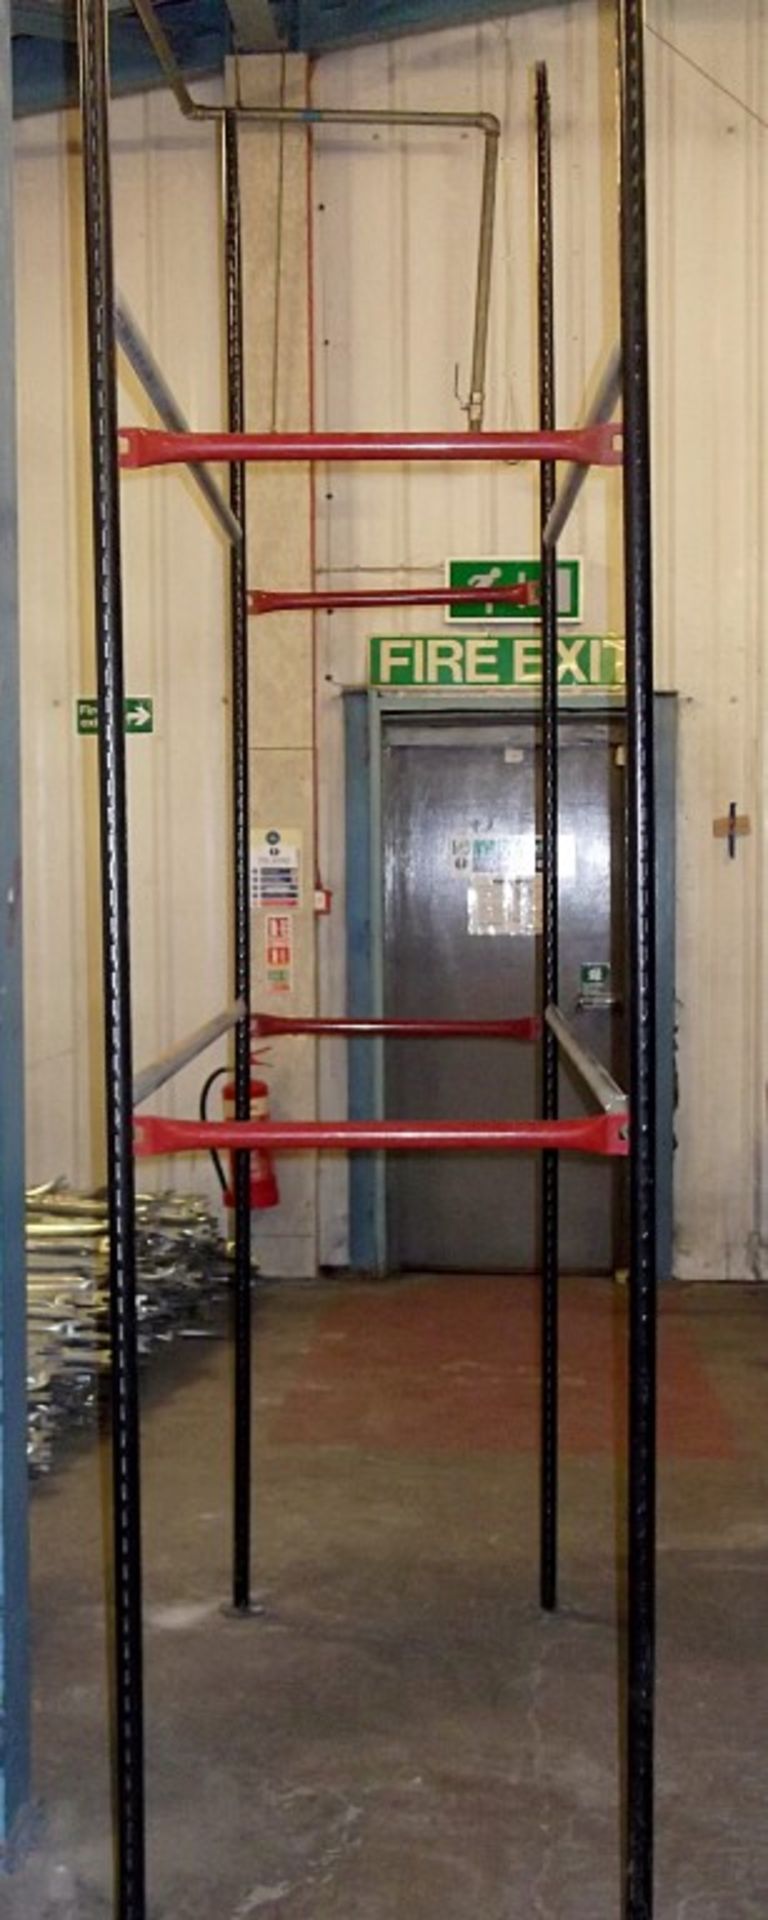 2 x Bays Of Hanging Garment Railing / Dress Racking - 10ft Tall - Pre-used In Good Condition, With - Image 3 of 7